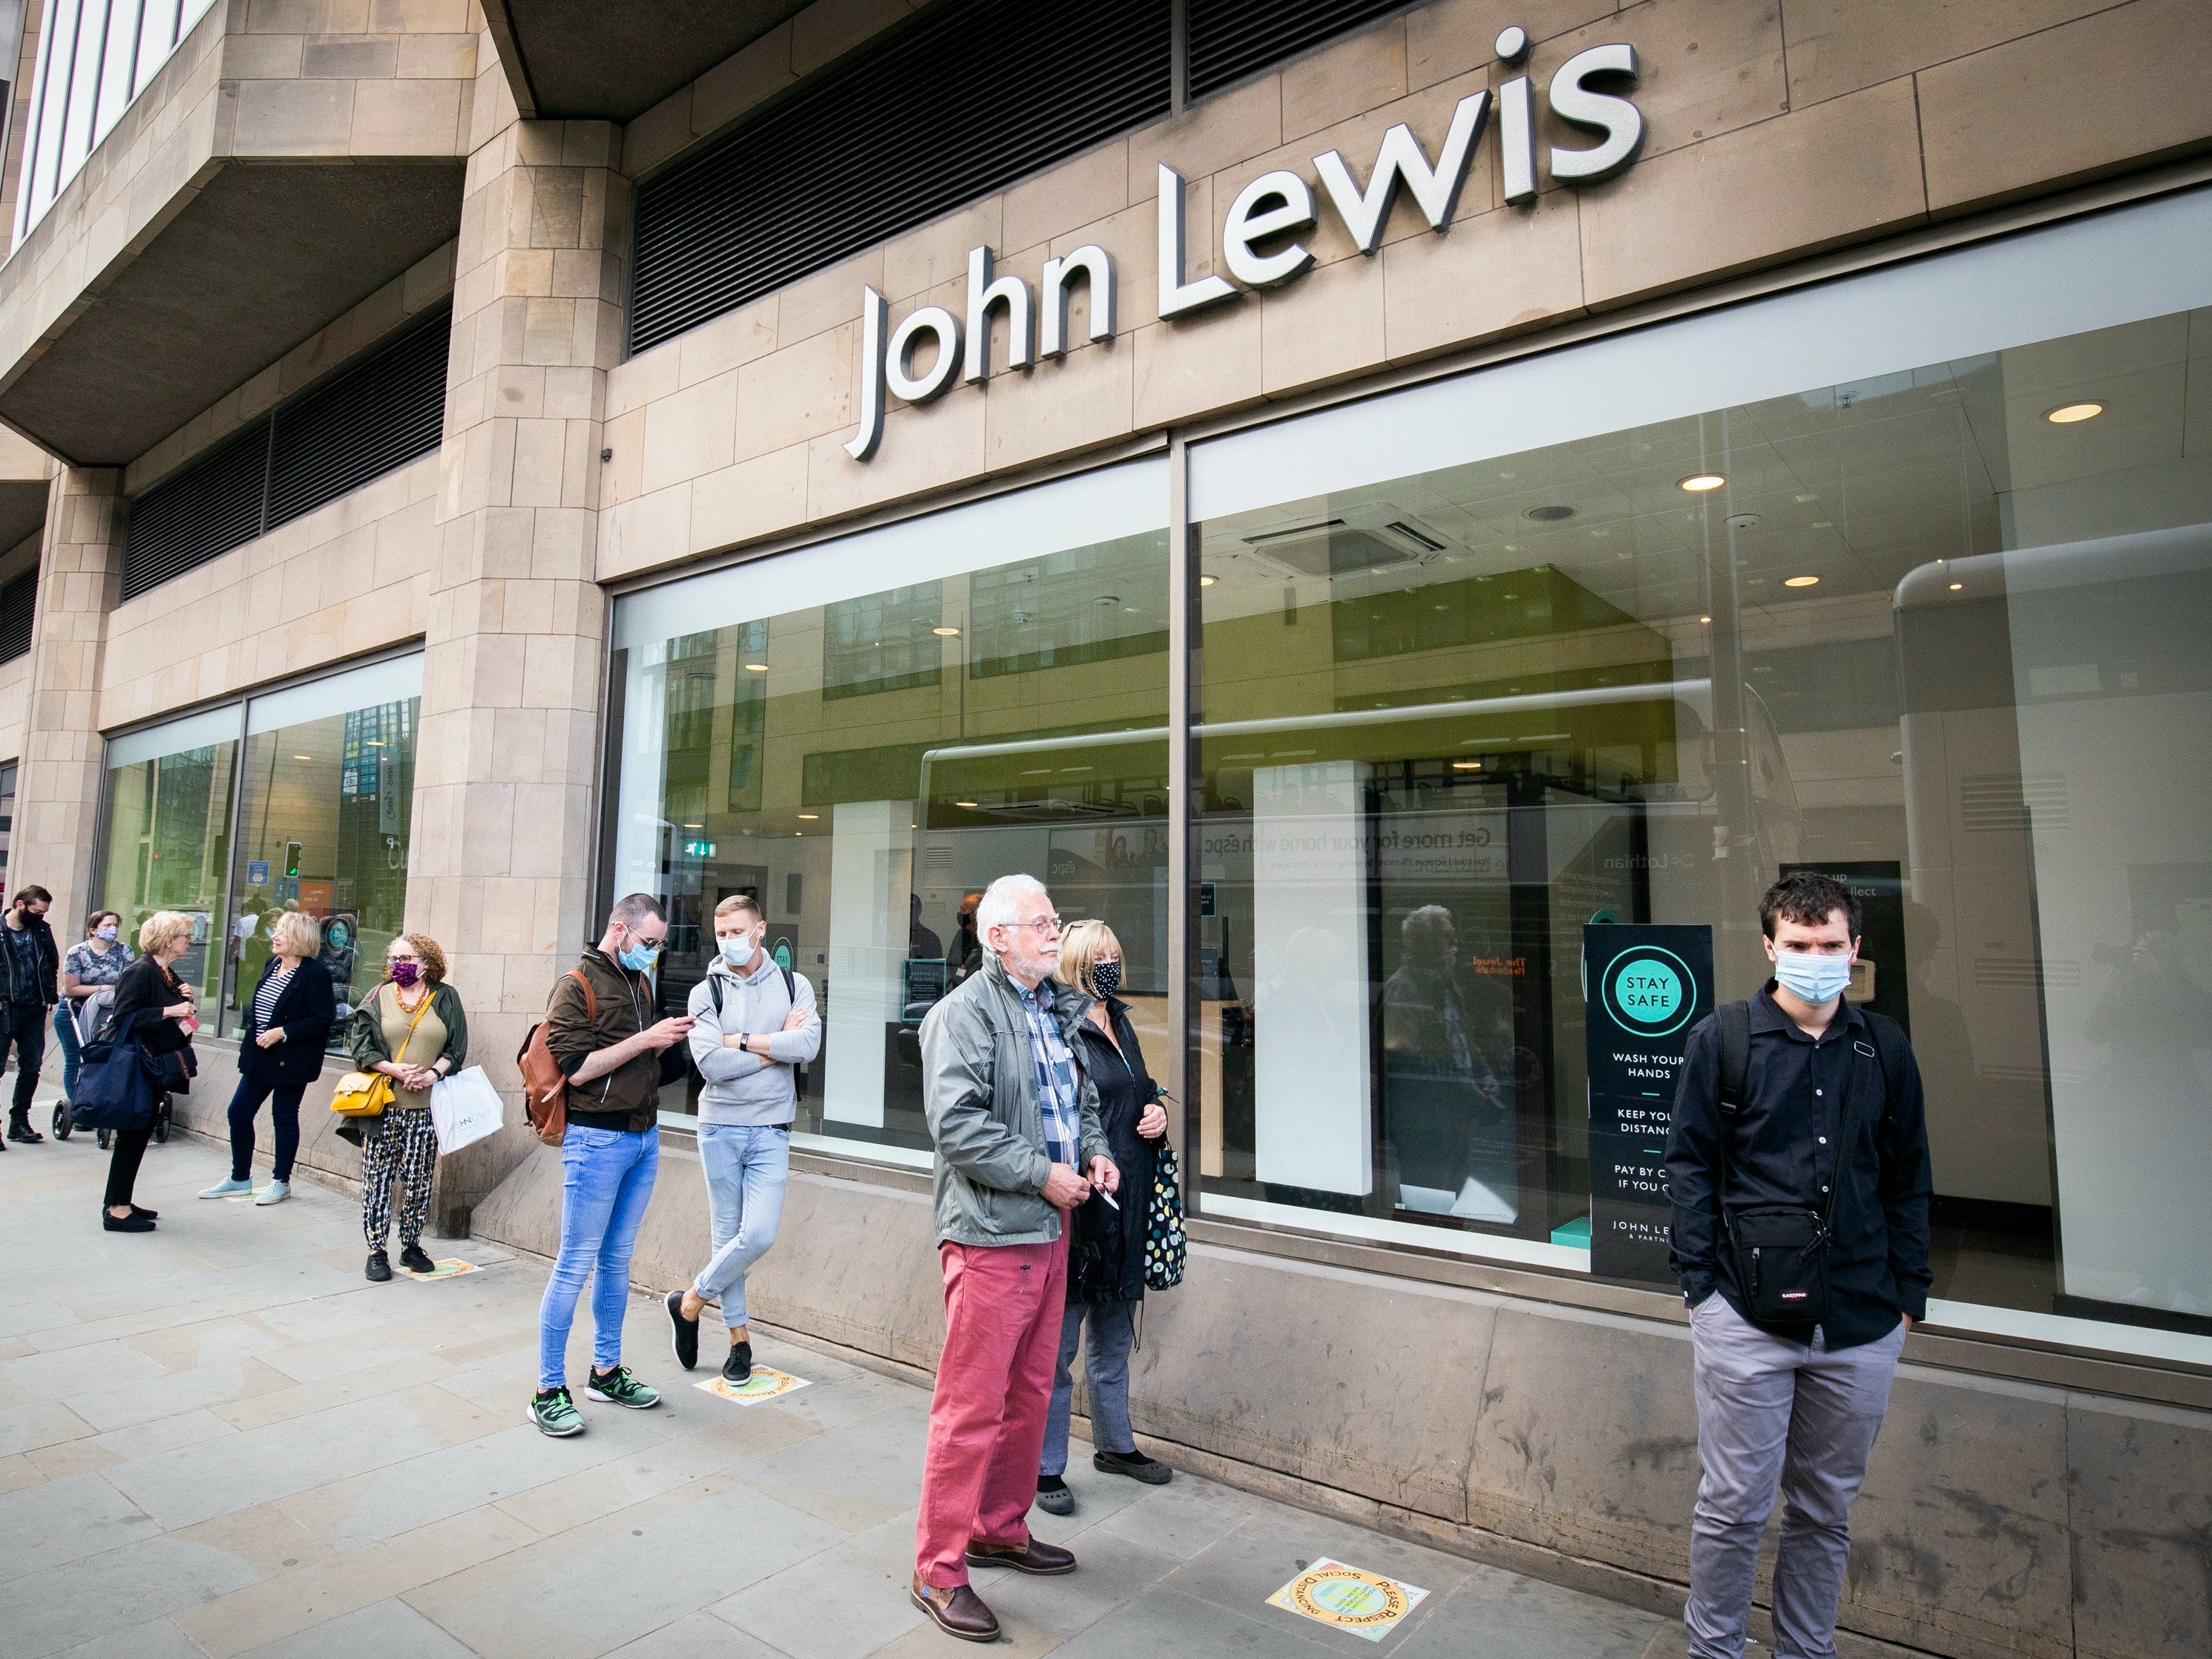 People queue outside a John Lewis store in Edinburgh in July 2020 as the first lockdown was eased